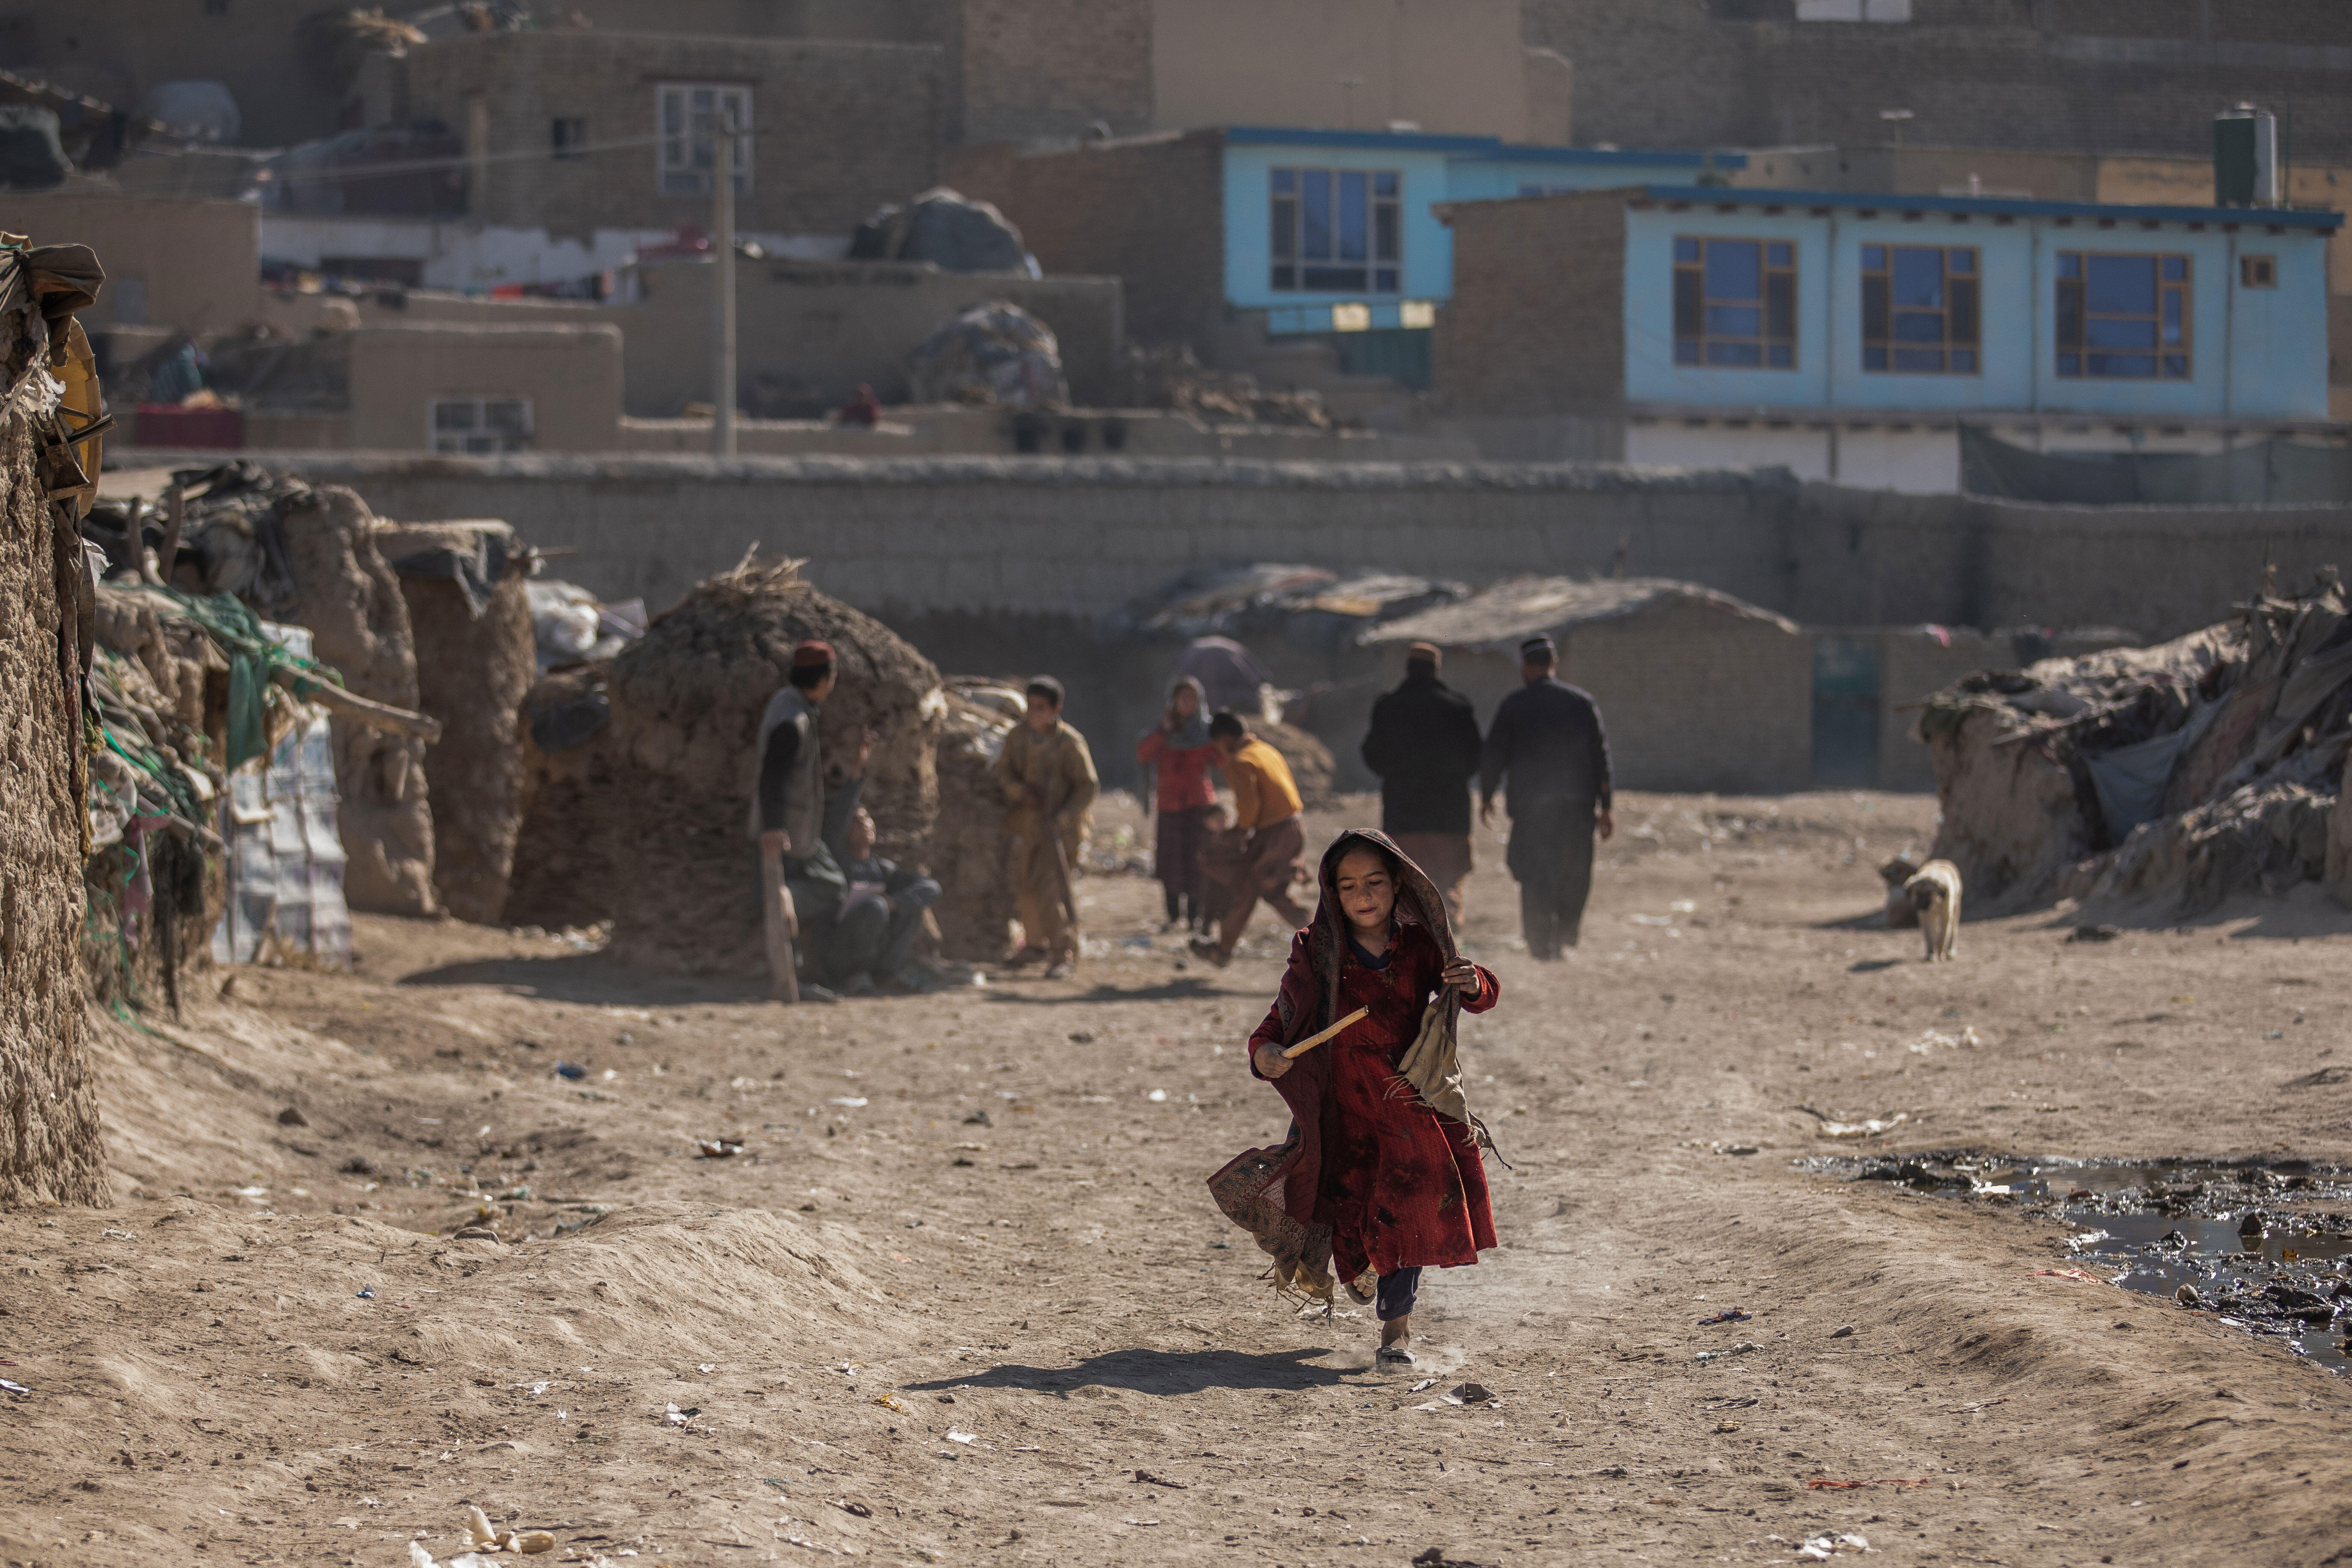 In a camp in Afghanistan, a young girl runs while holding a stick. There are other people and makeshift homes in the background. 